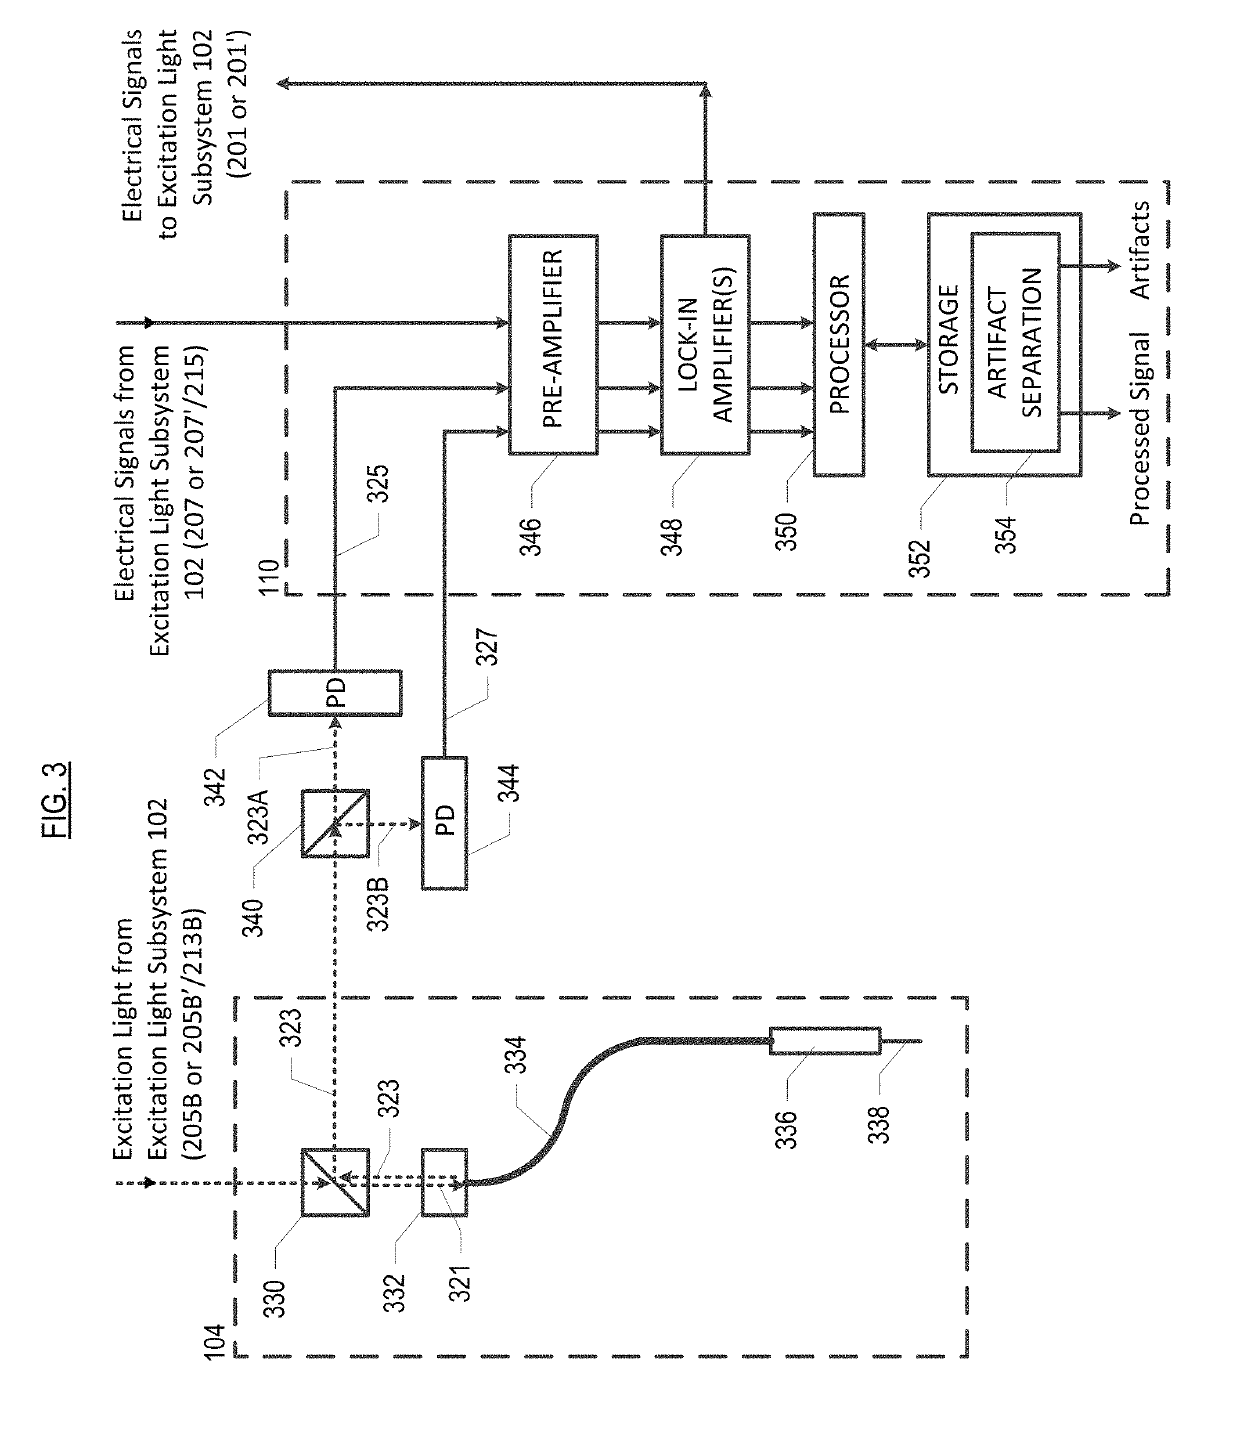 Method and apparatus for optical recording of biological parameters in freely moving animals